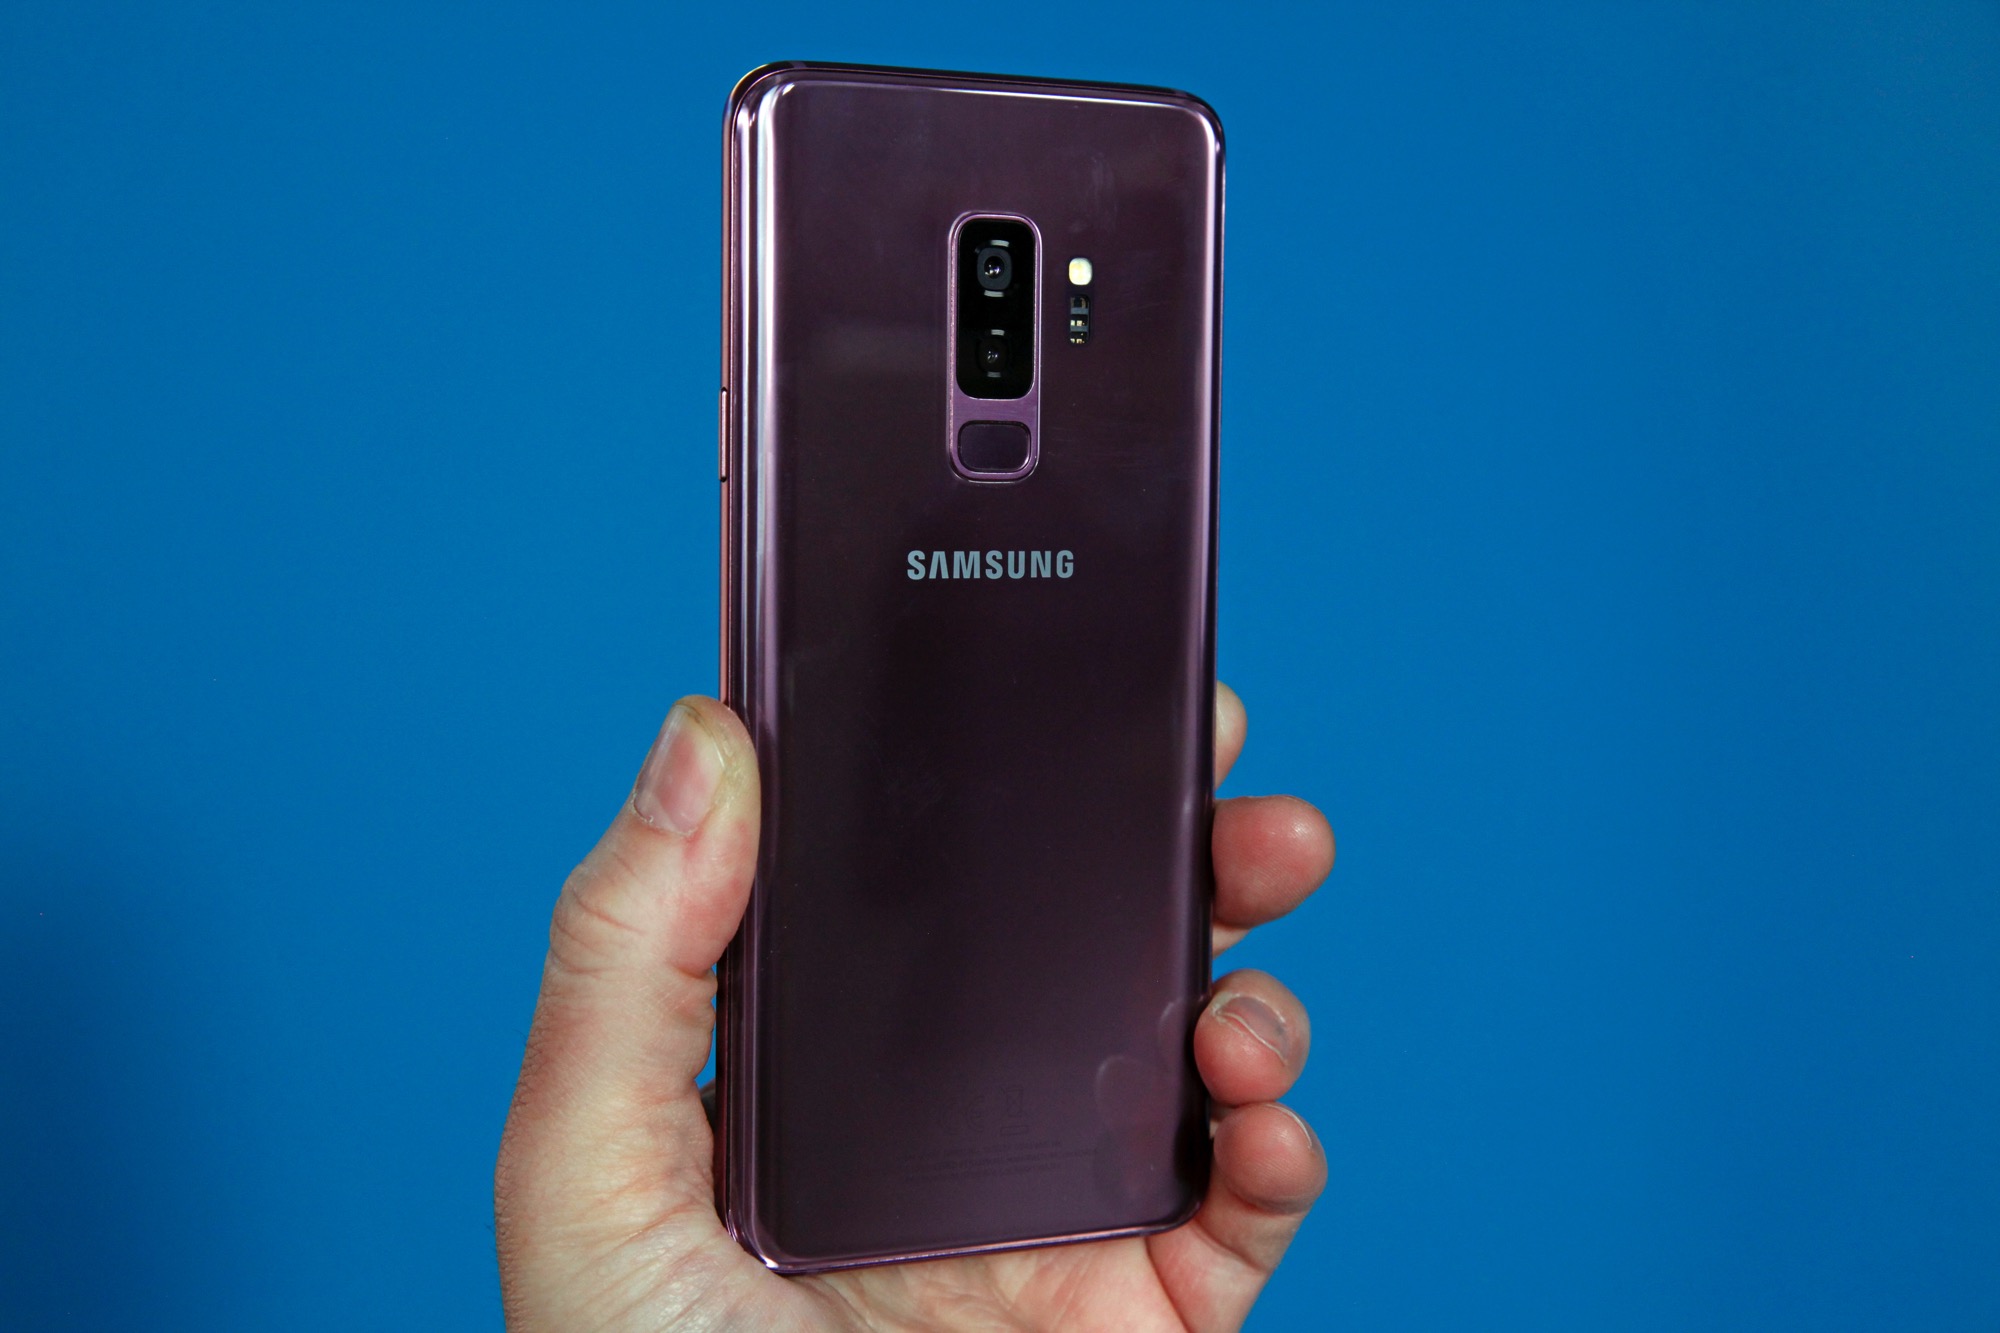 Samsung just shared an impressive Galaxy S9 statistic that 